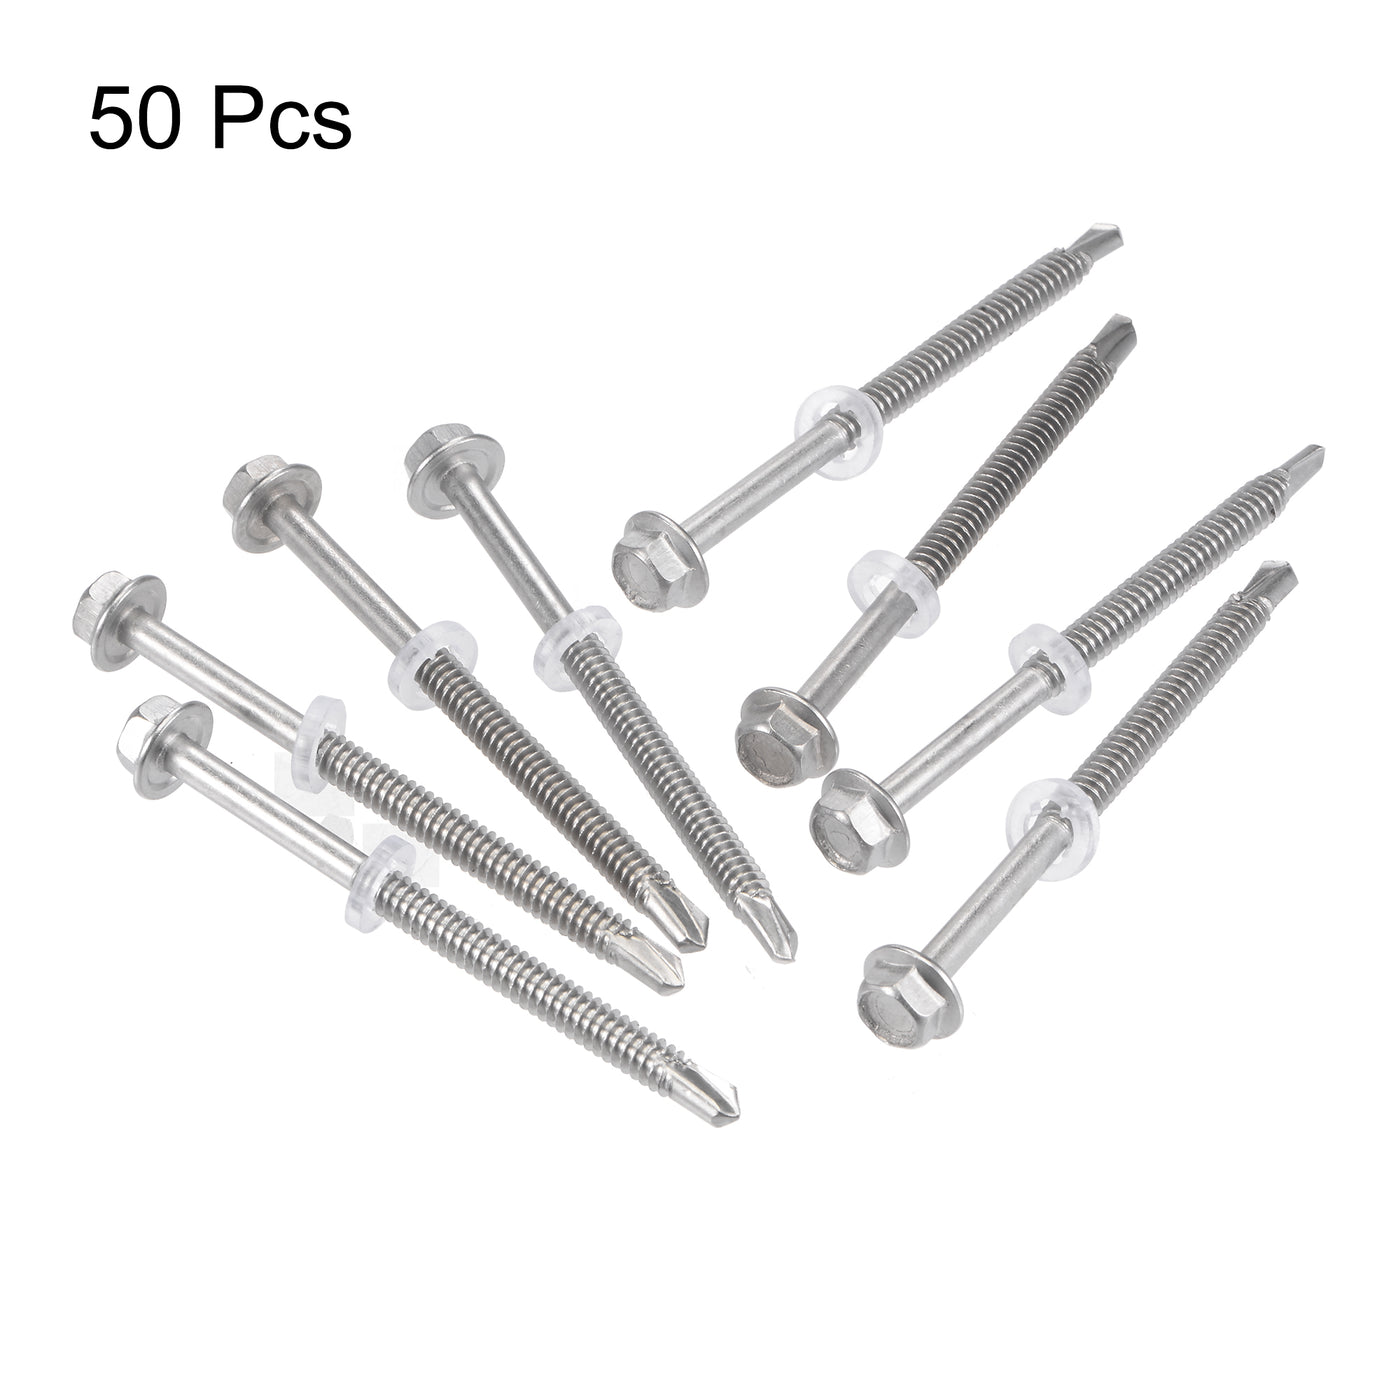 uxcell Uxcell #12 x 2 61/64" 410 Stainless Steel Hex Washer Head Self Drilling Screws 50pcs